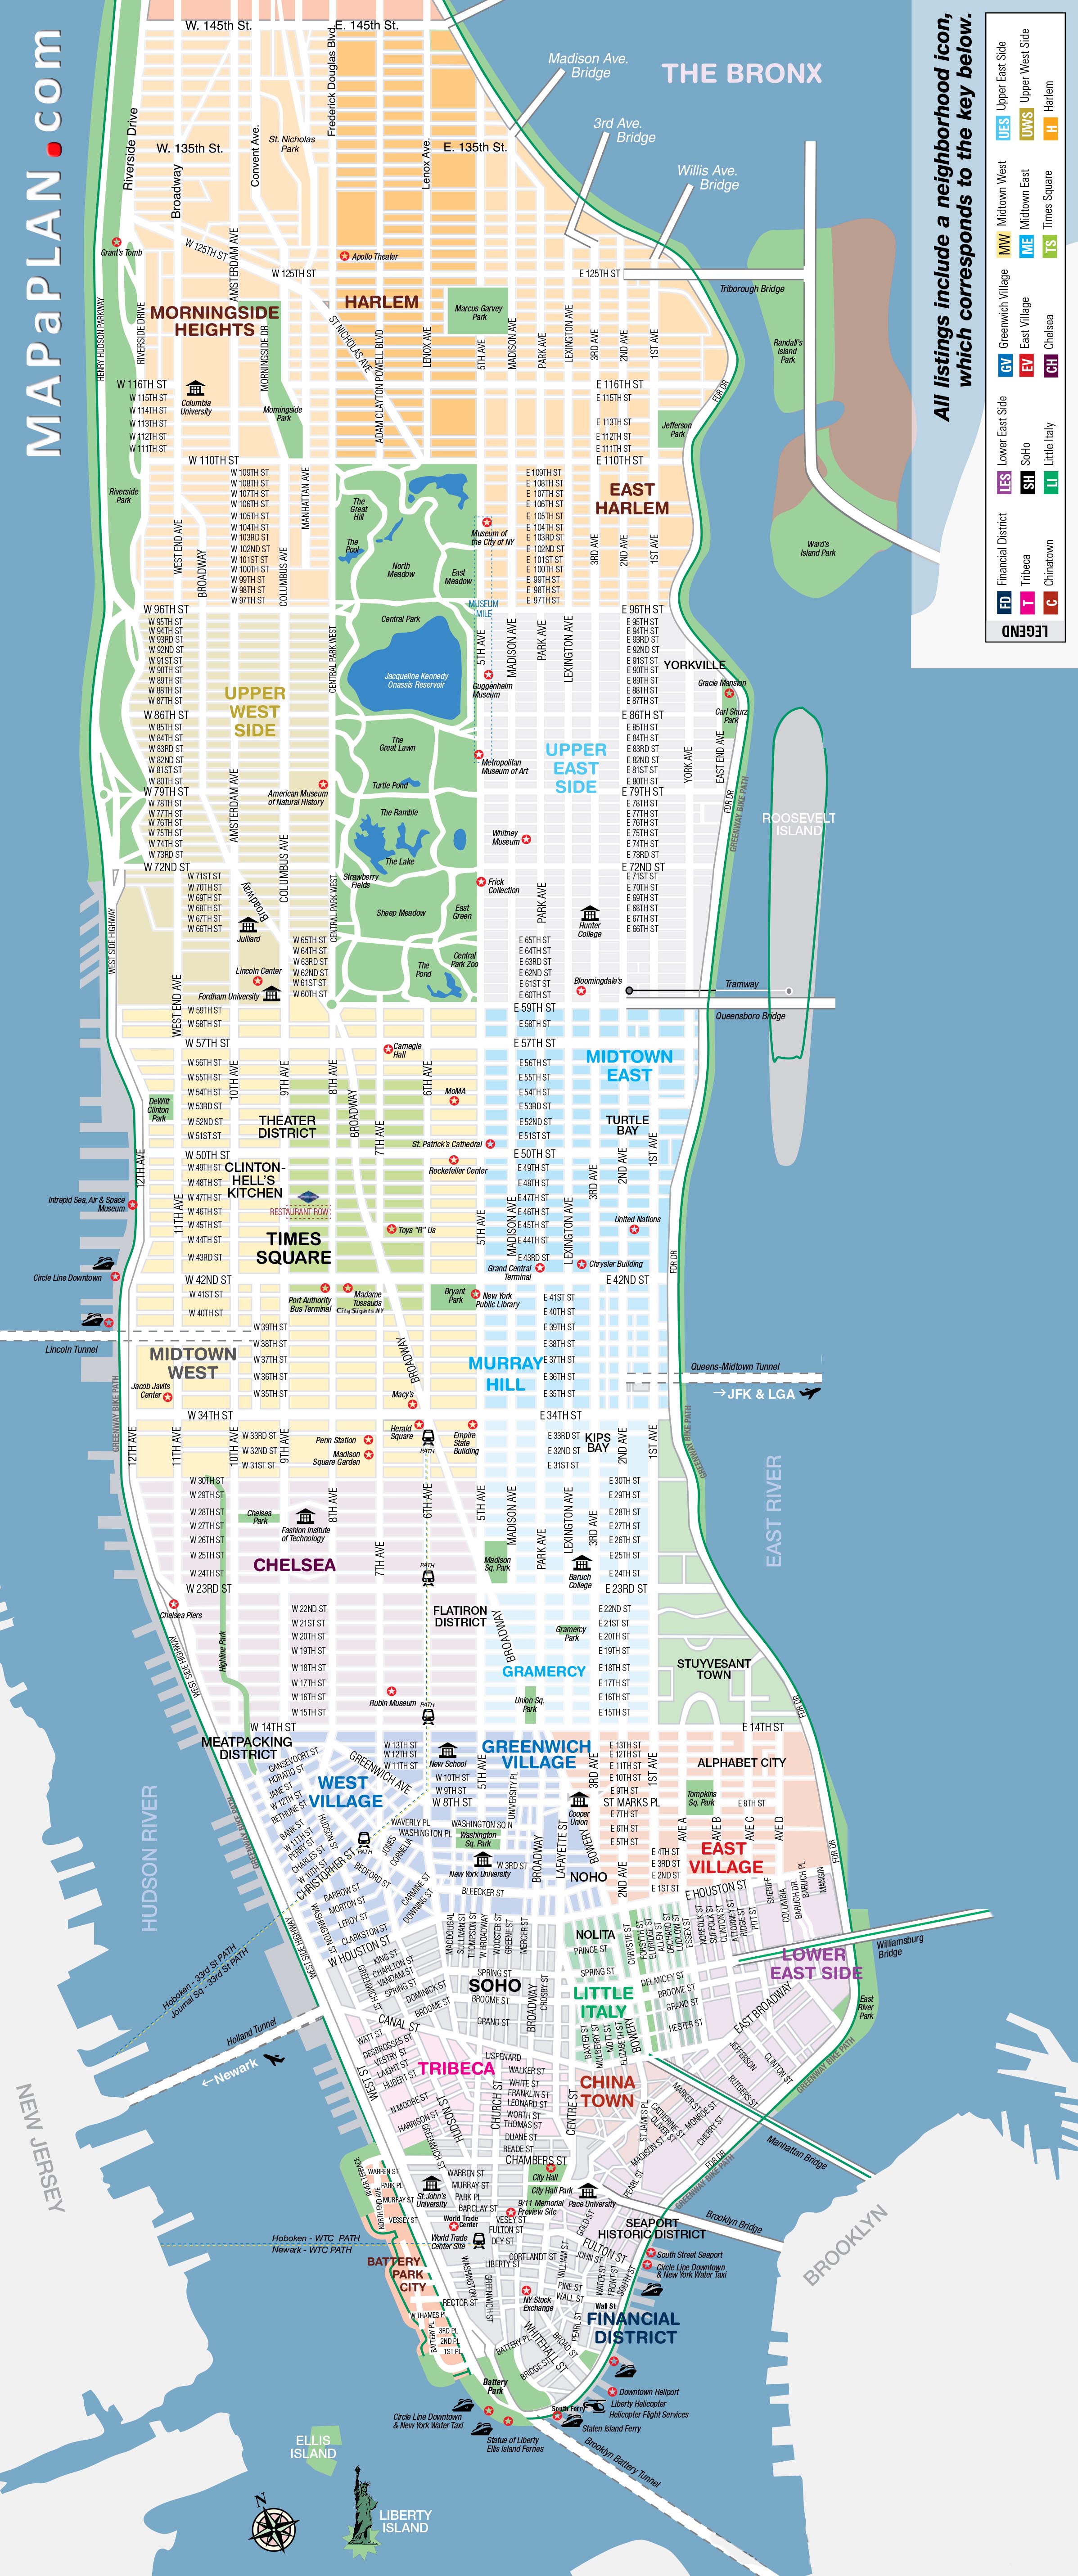 manhattan-streets-and-avenues-must-see-places-new-york-top-tourist-attractions-map